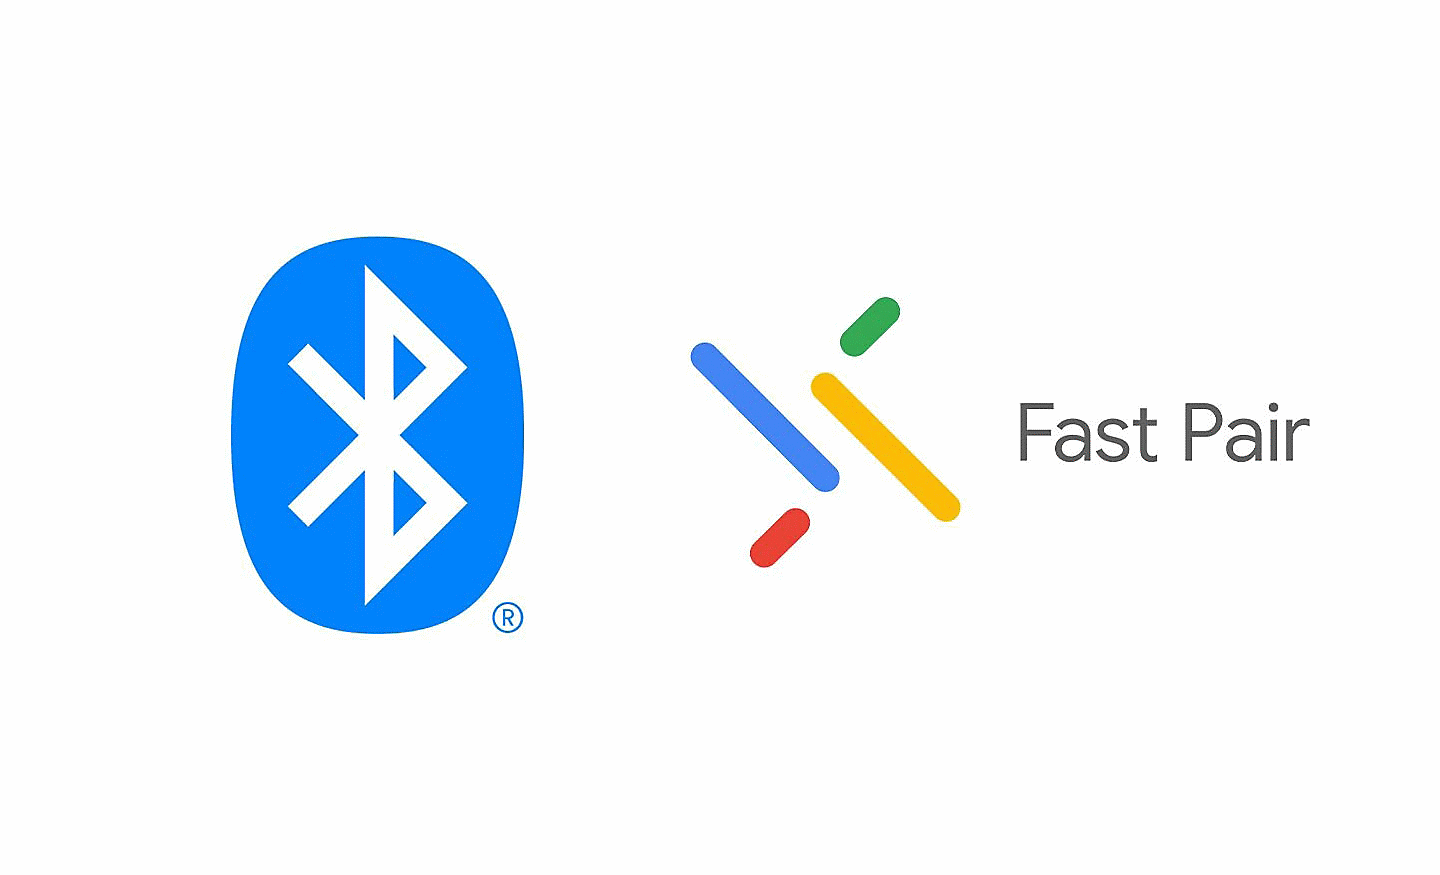 Image of a blue Bluetooth logo sitting next to the Google Fast Pair logo